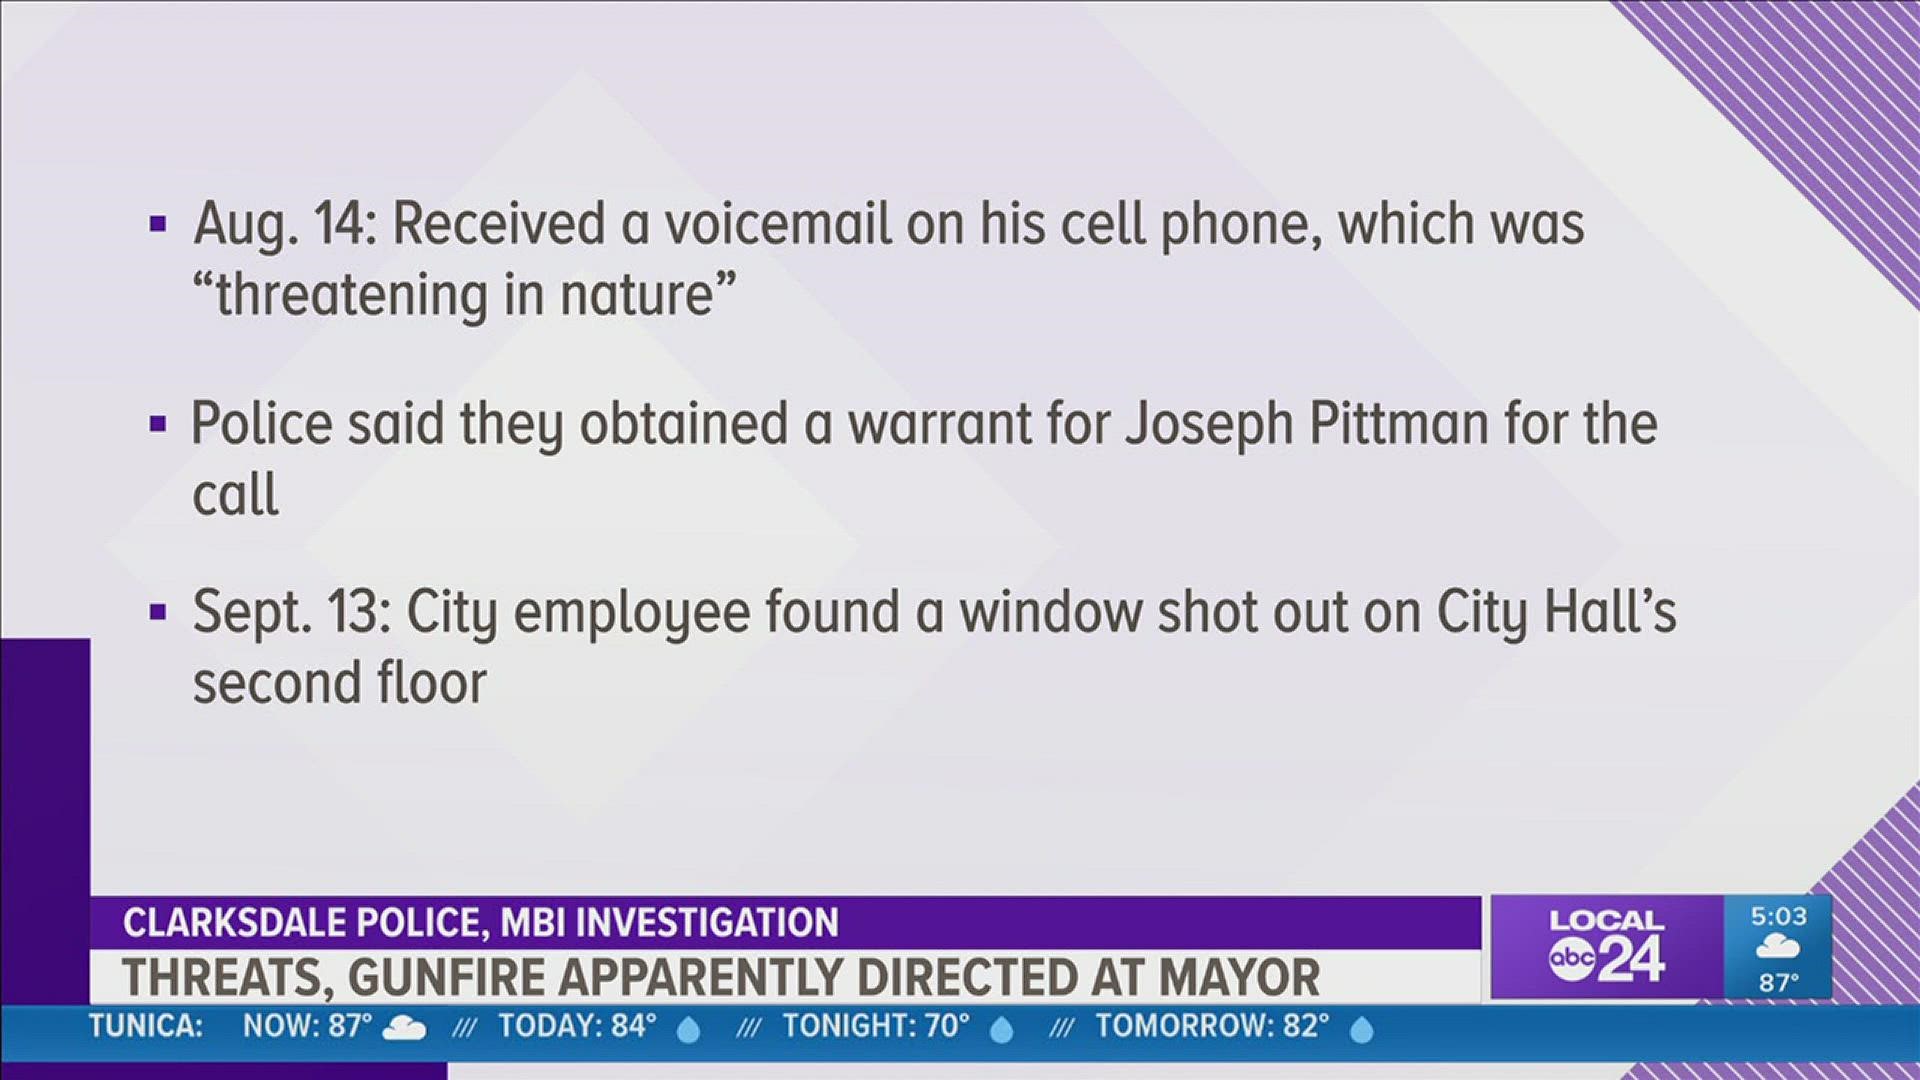 In one case, investigators said the Mayor received a threatening voicemail. Then Monday, a shot was fired through the window of the mayor's office at city hall.